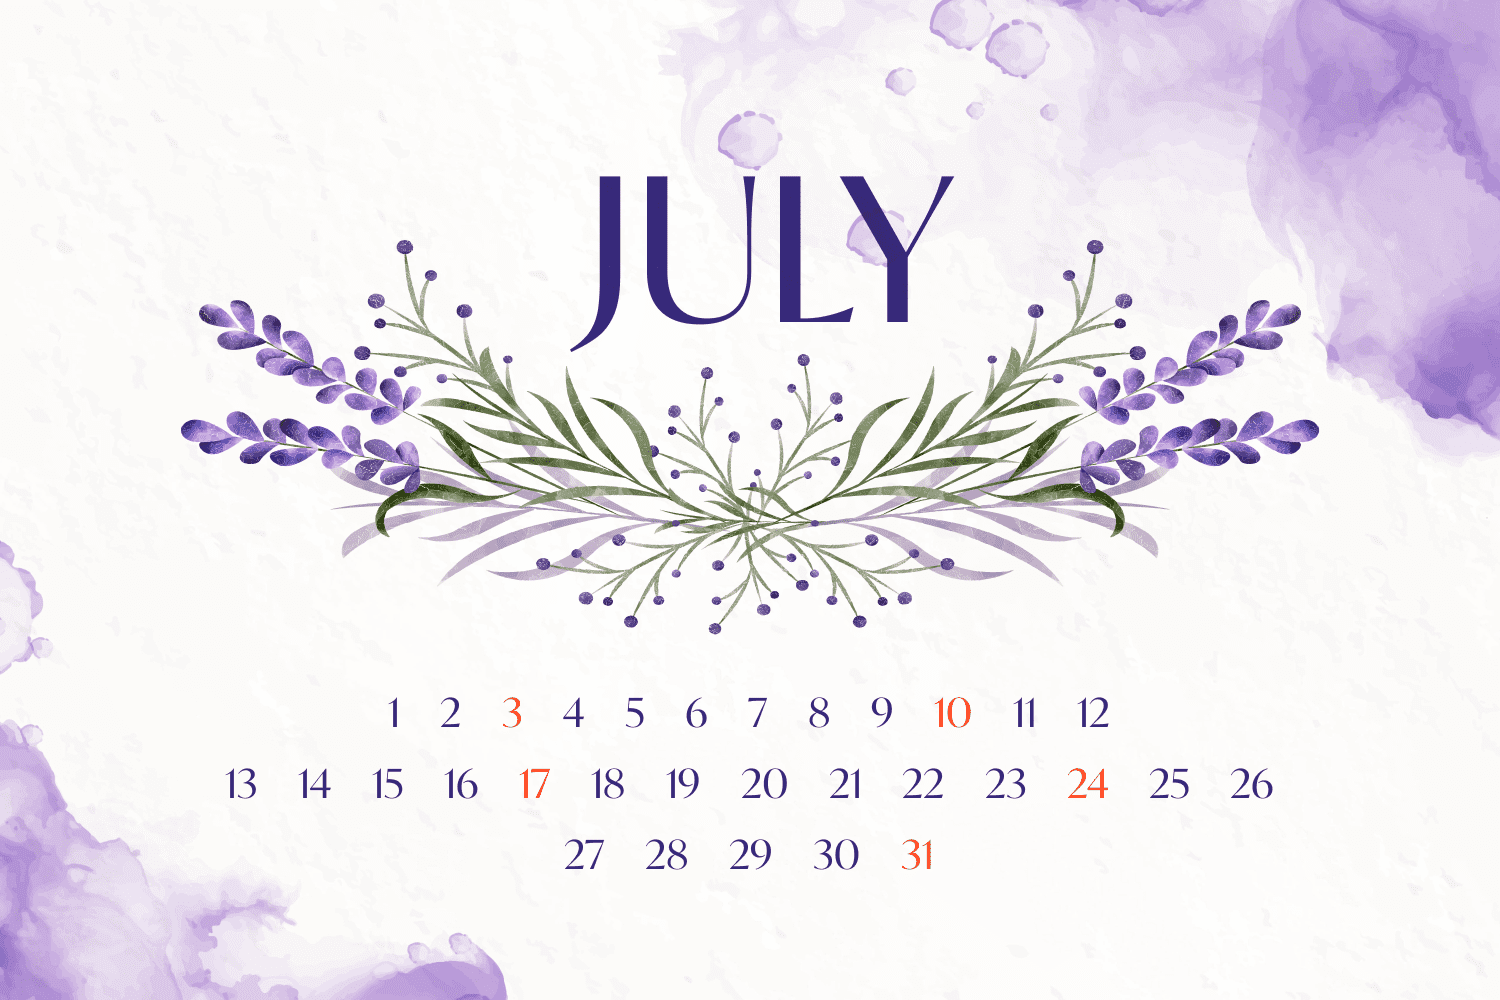 Calendar with lavender on white and purple background.